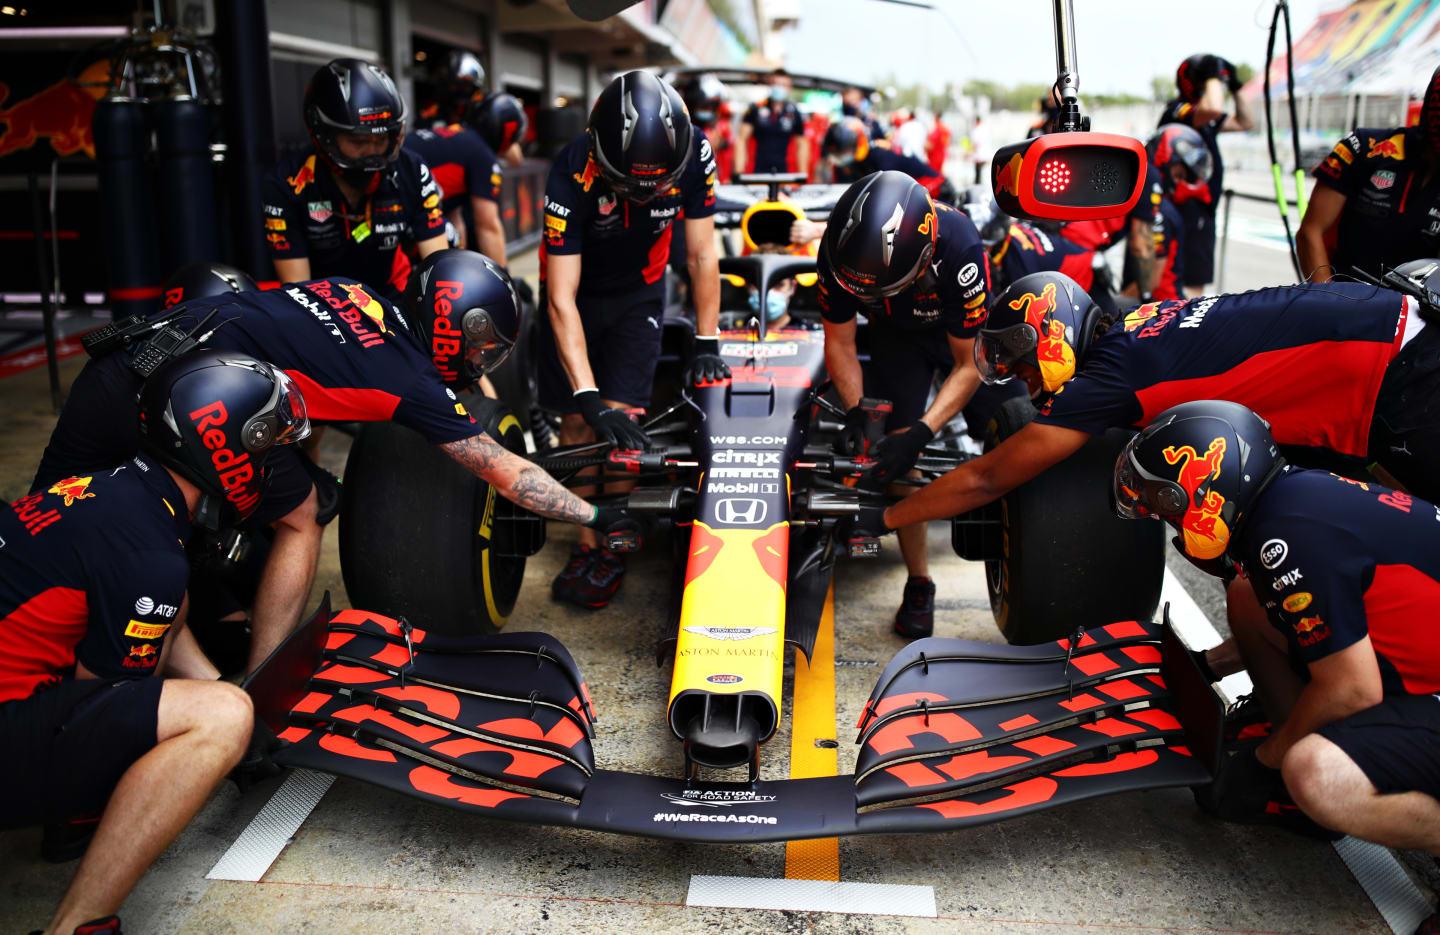 BARCELONA, SPAIN - AUGUST 13: The Red Bull Racing team practice pitstops during previews ahead of